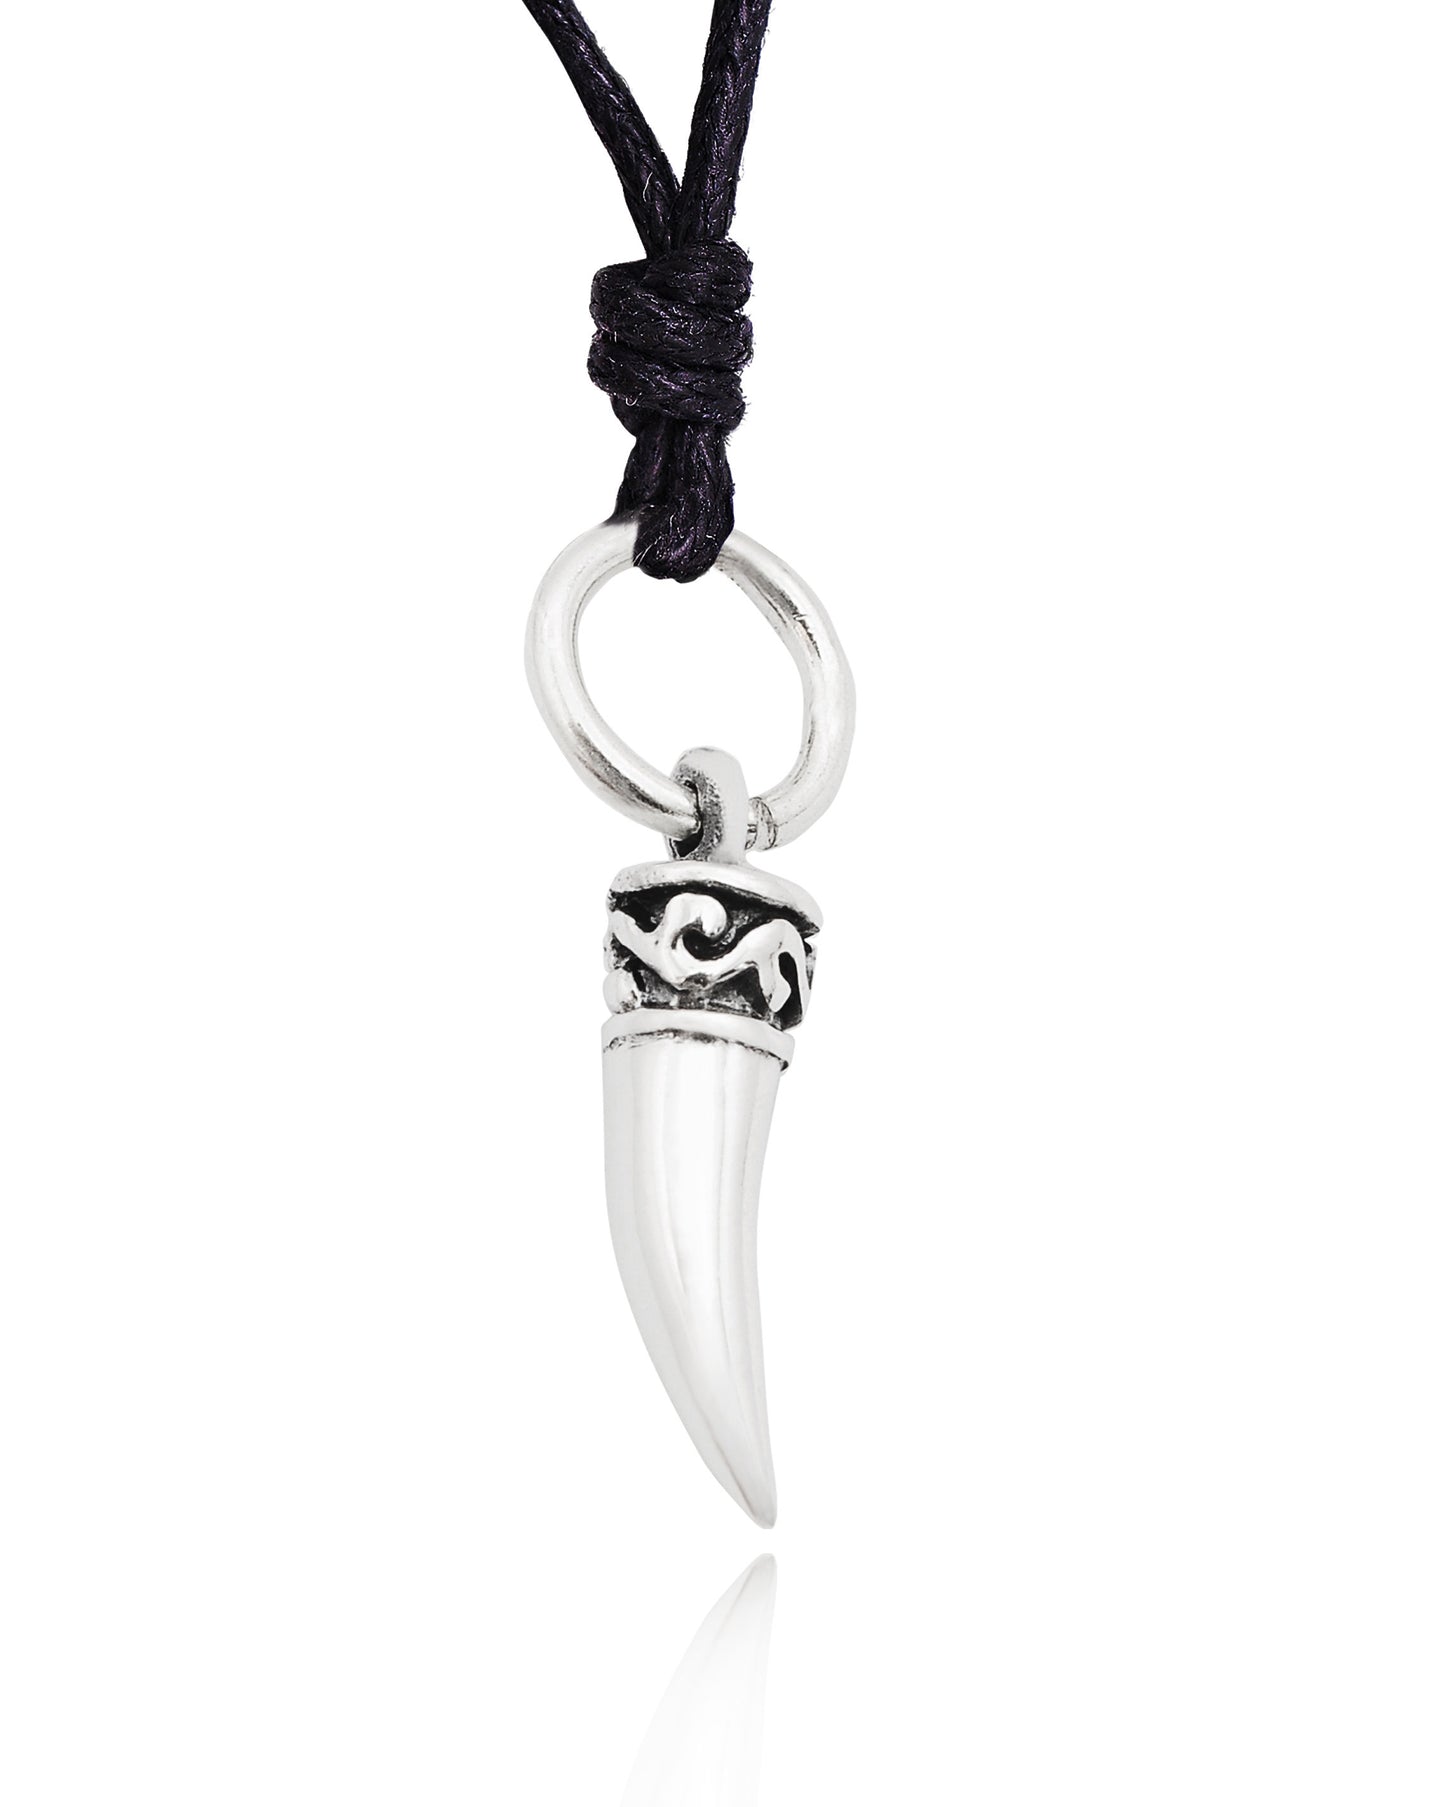 Stylish Ivory 92.5 Sterling Silver Charm Necklace Pendant Jewelry